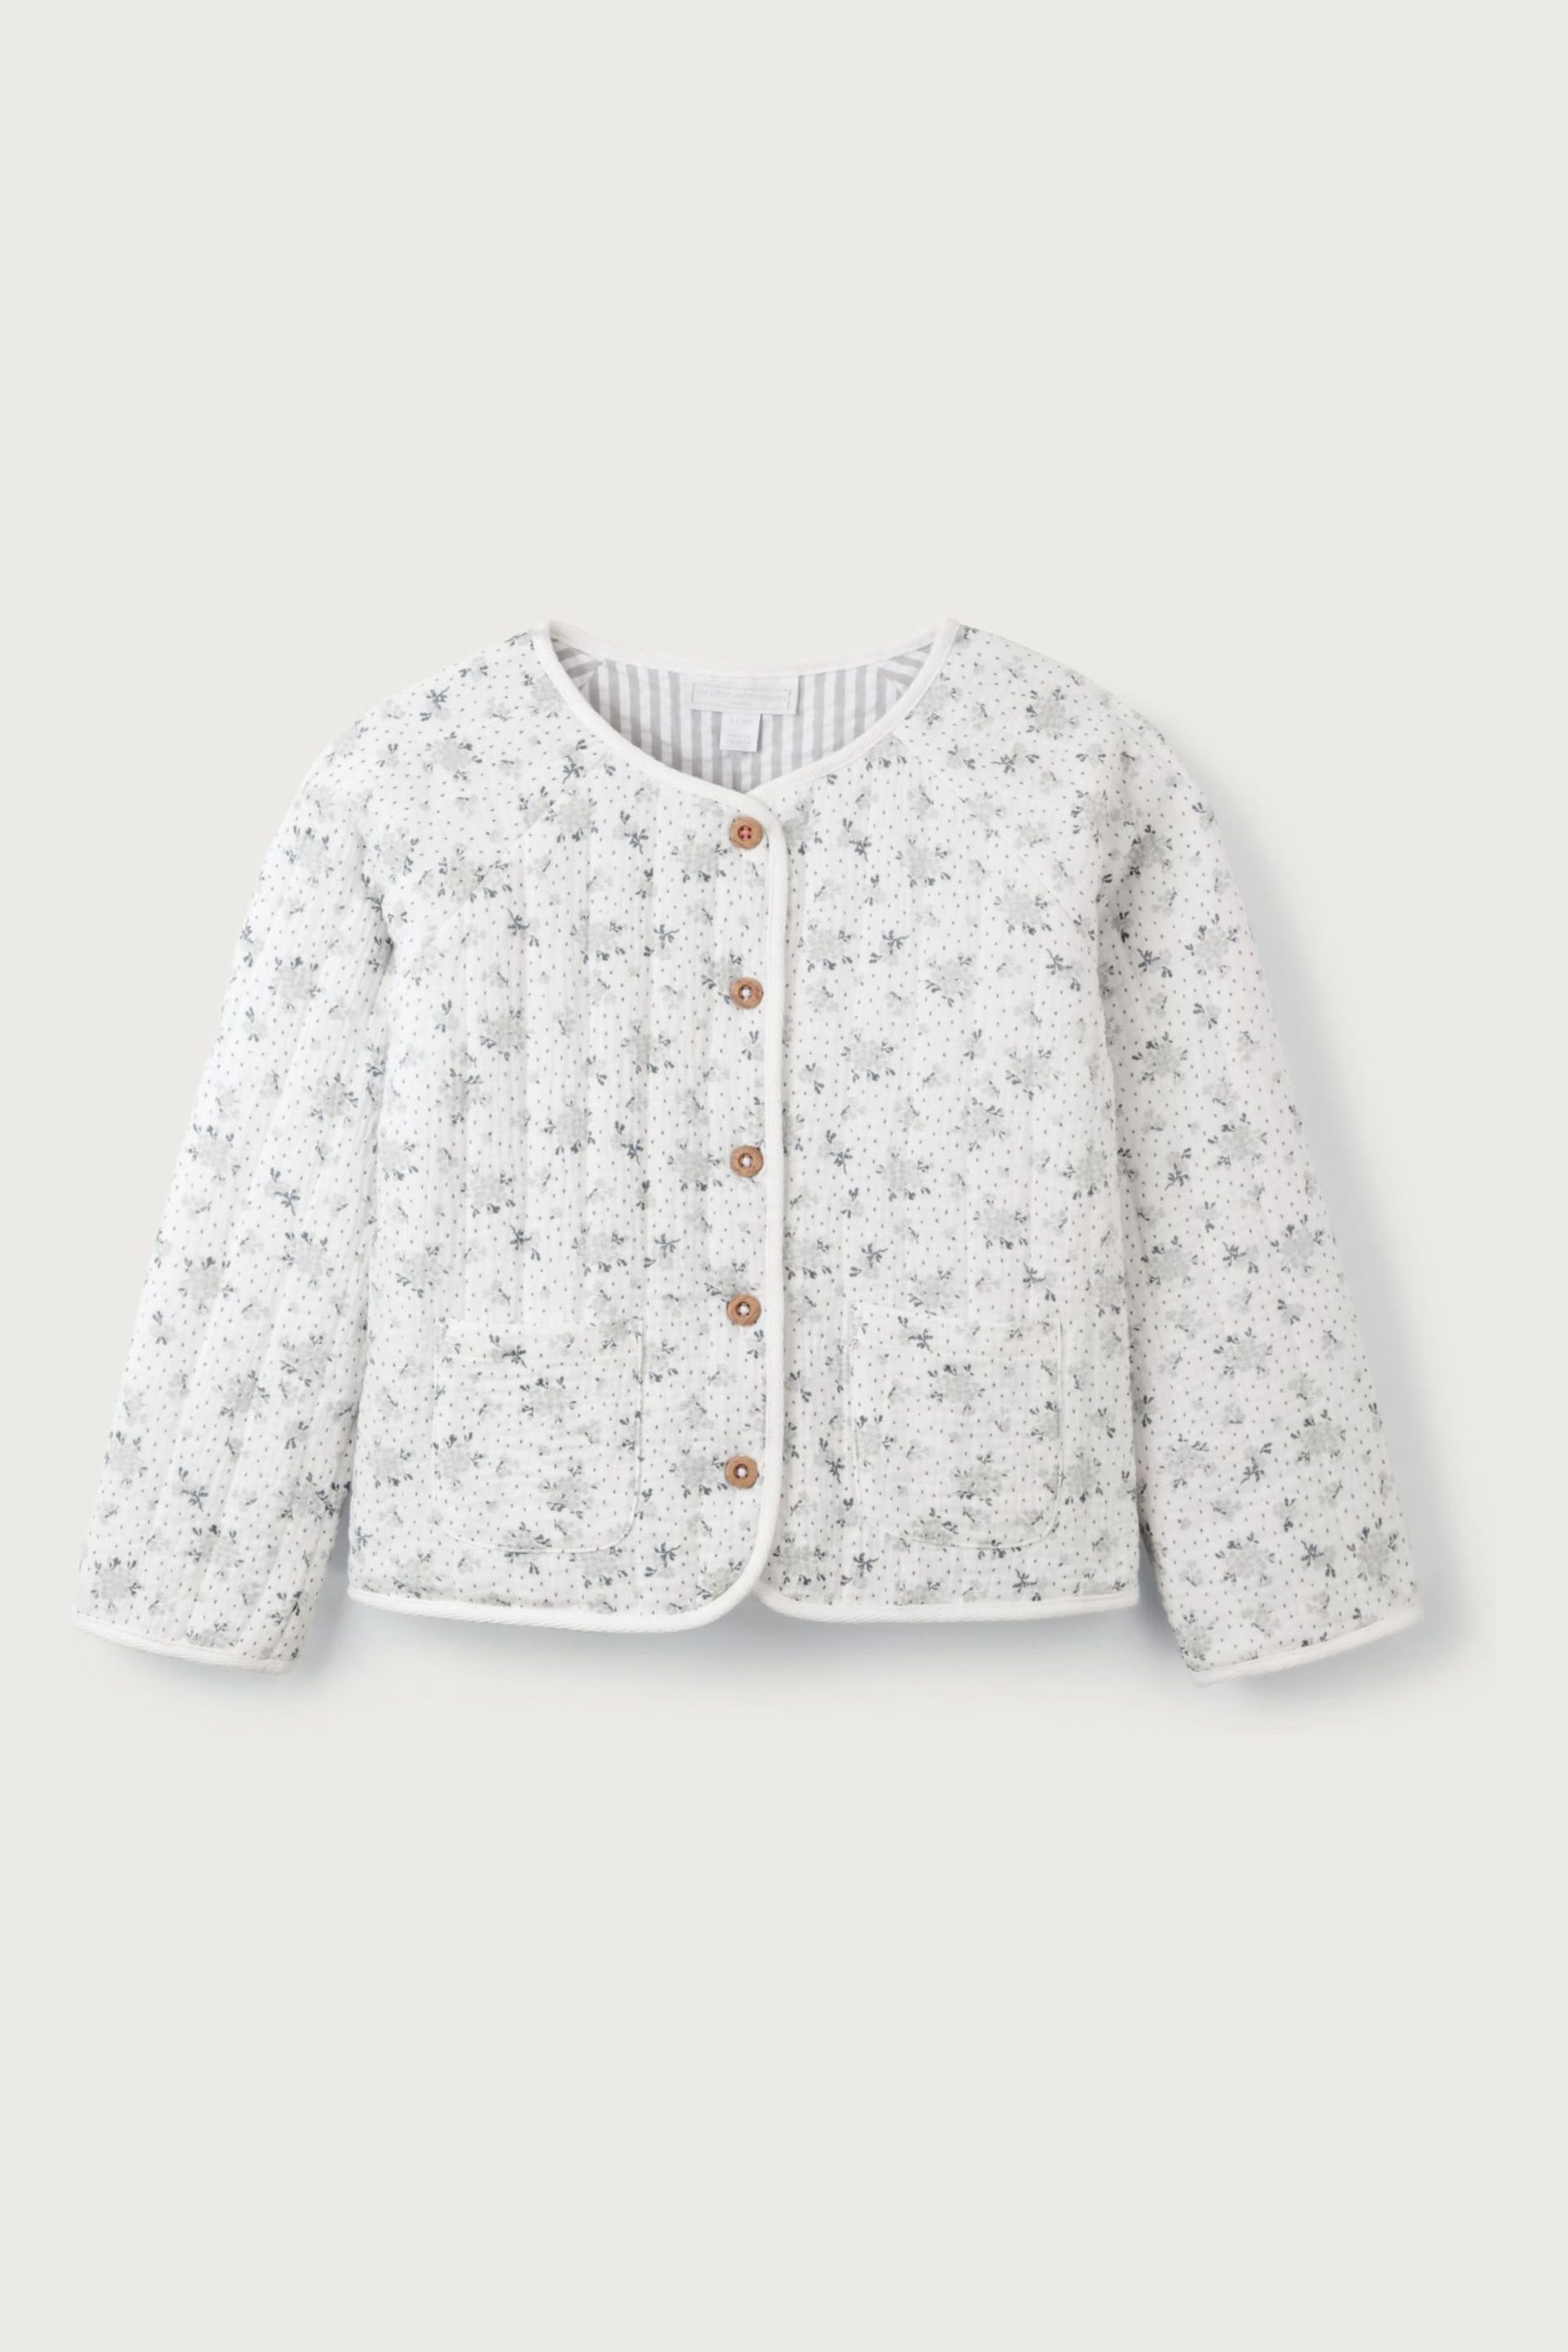 The White Company Camille Organic Crinkle Cotton Reversible Quilted White Jacket - Image 9 of 10